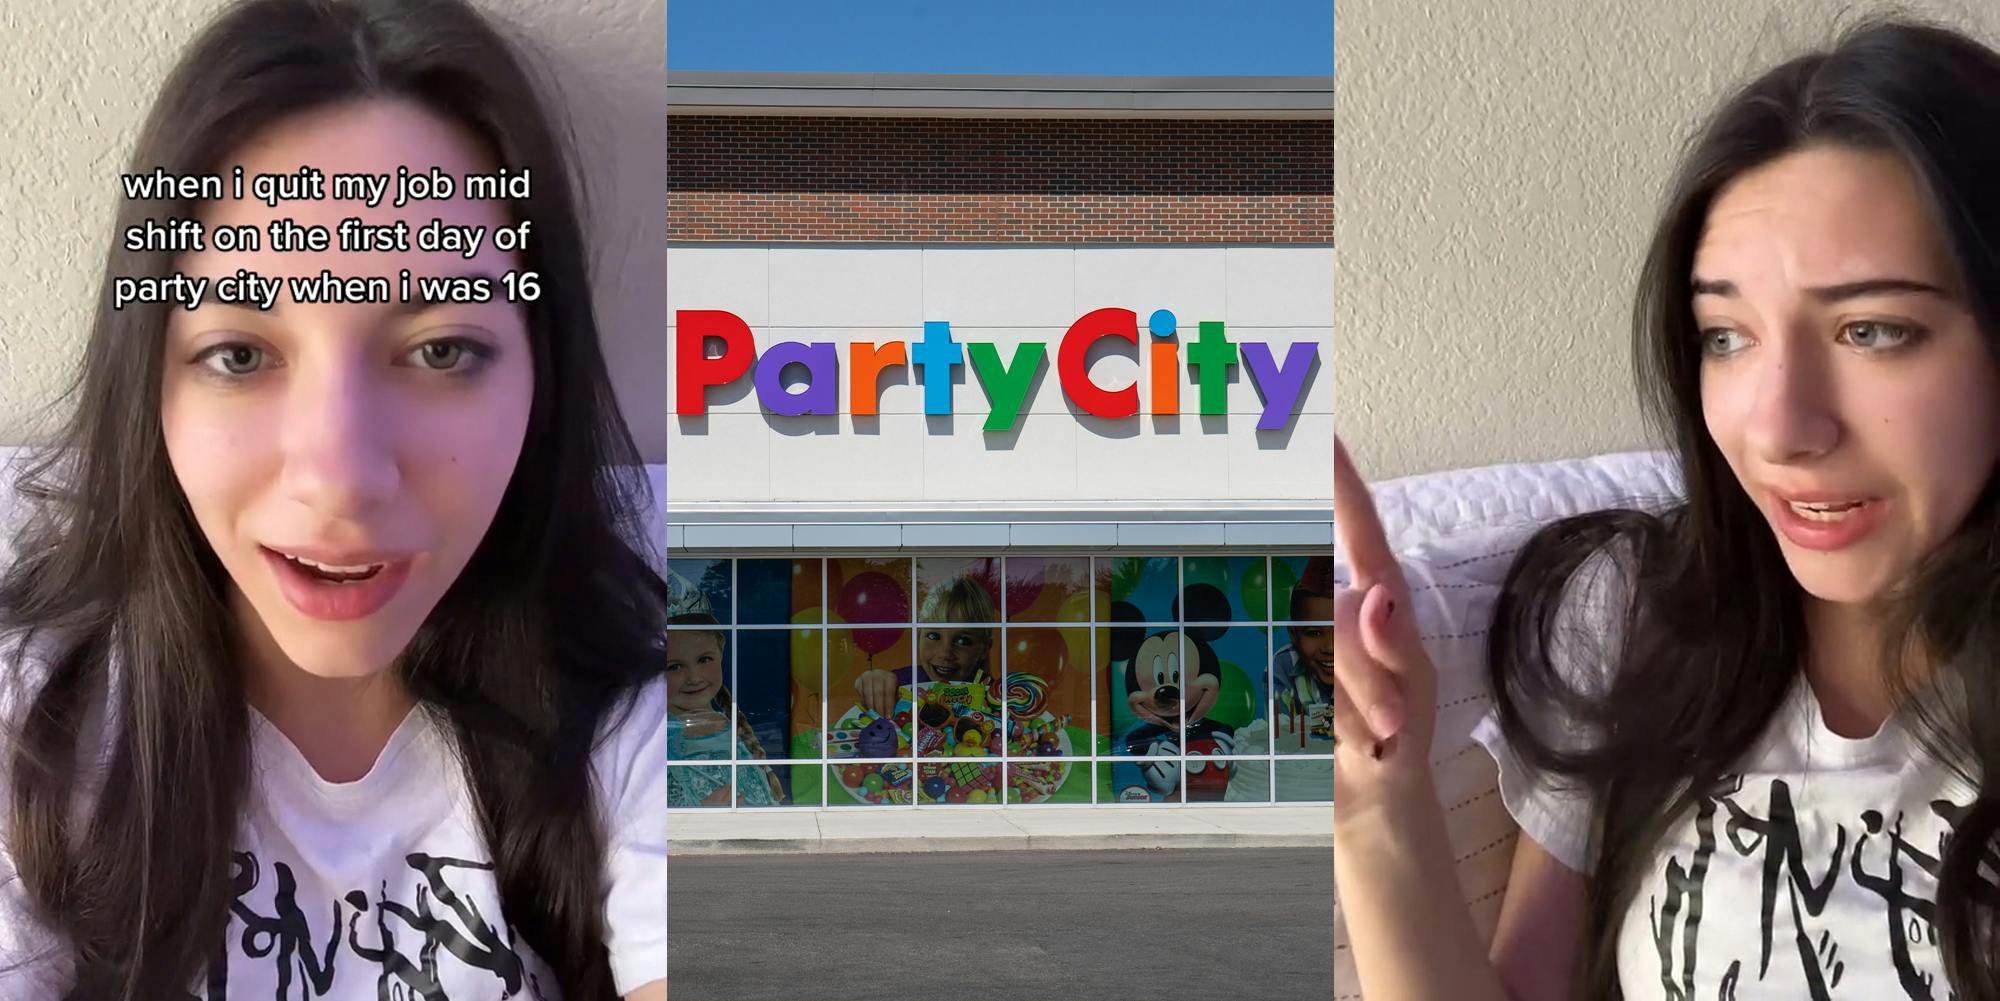 ex Party City employee speaking caption "when i quit my job mid shift on the first say of party city when i was 16" (l) Party City building with sign (c) ex Party City employee speaking with finger up (r)